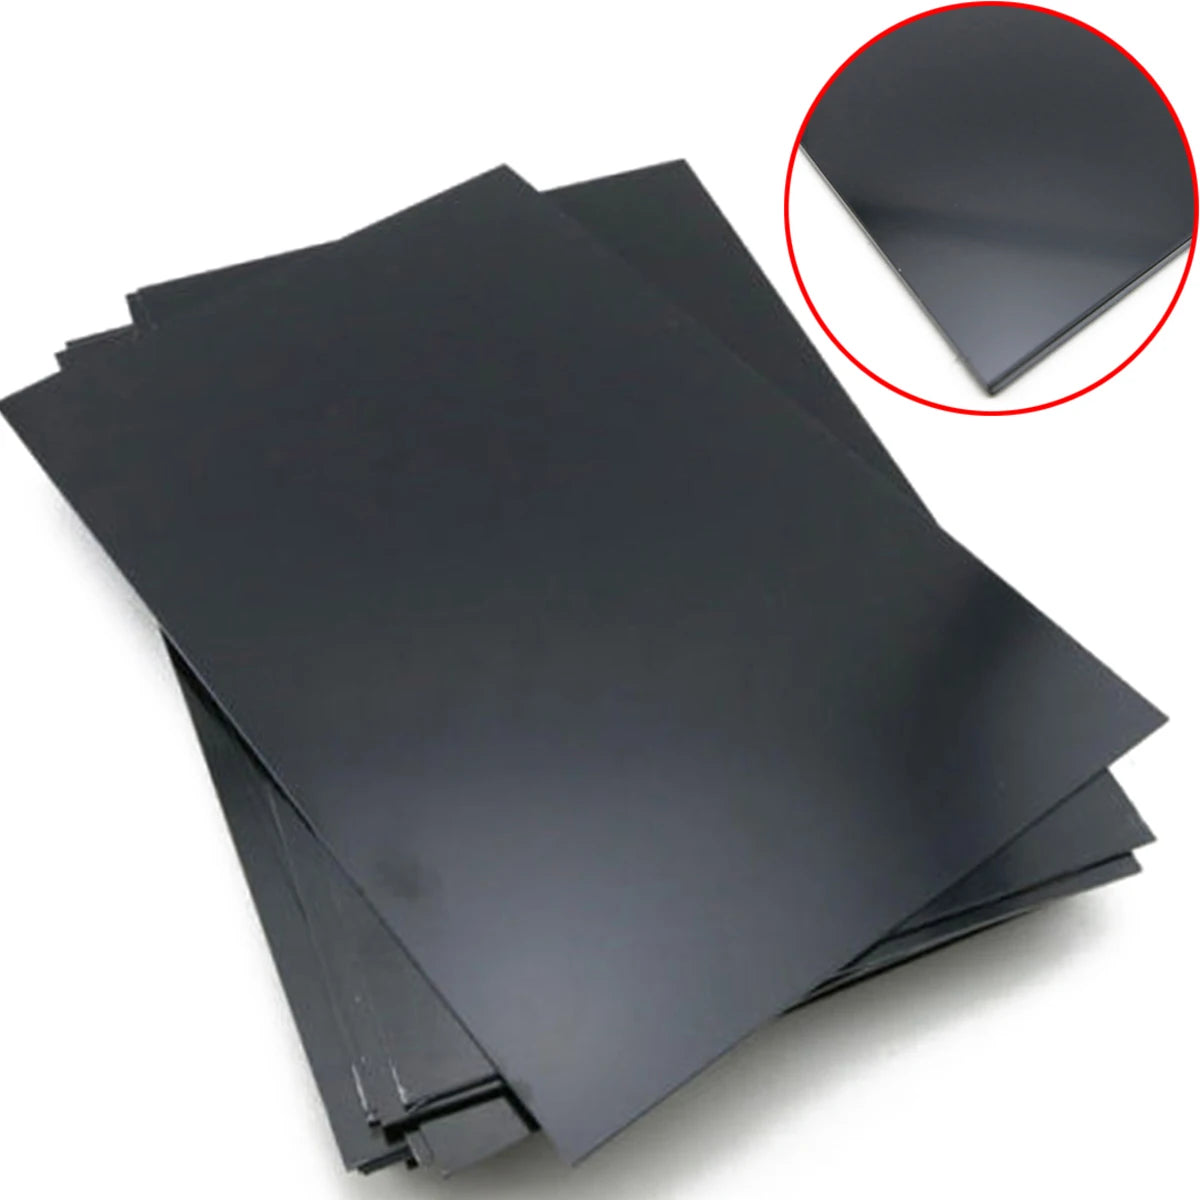 Easy-to-cut ABS plastic sheet with scissors